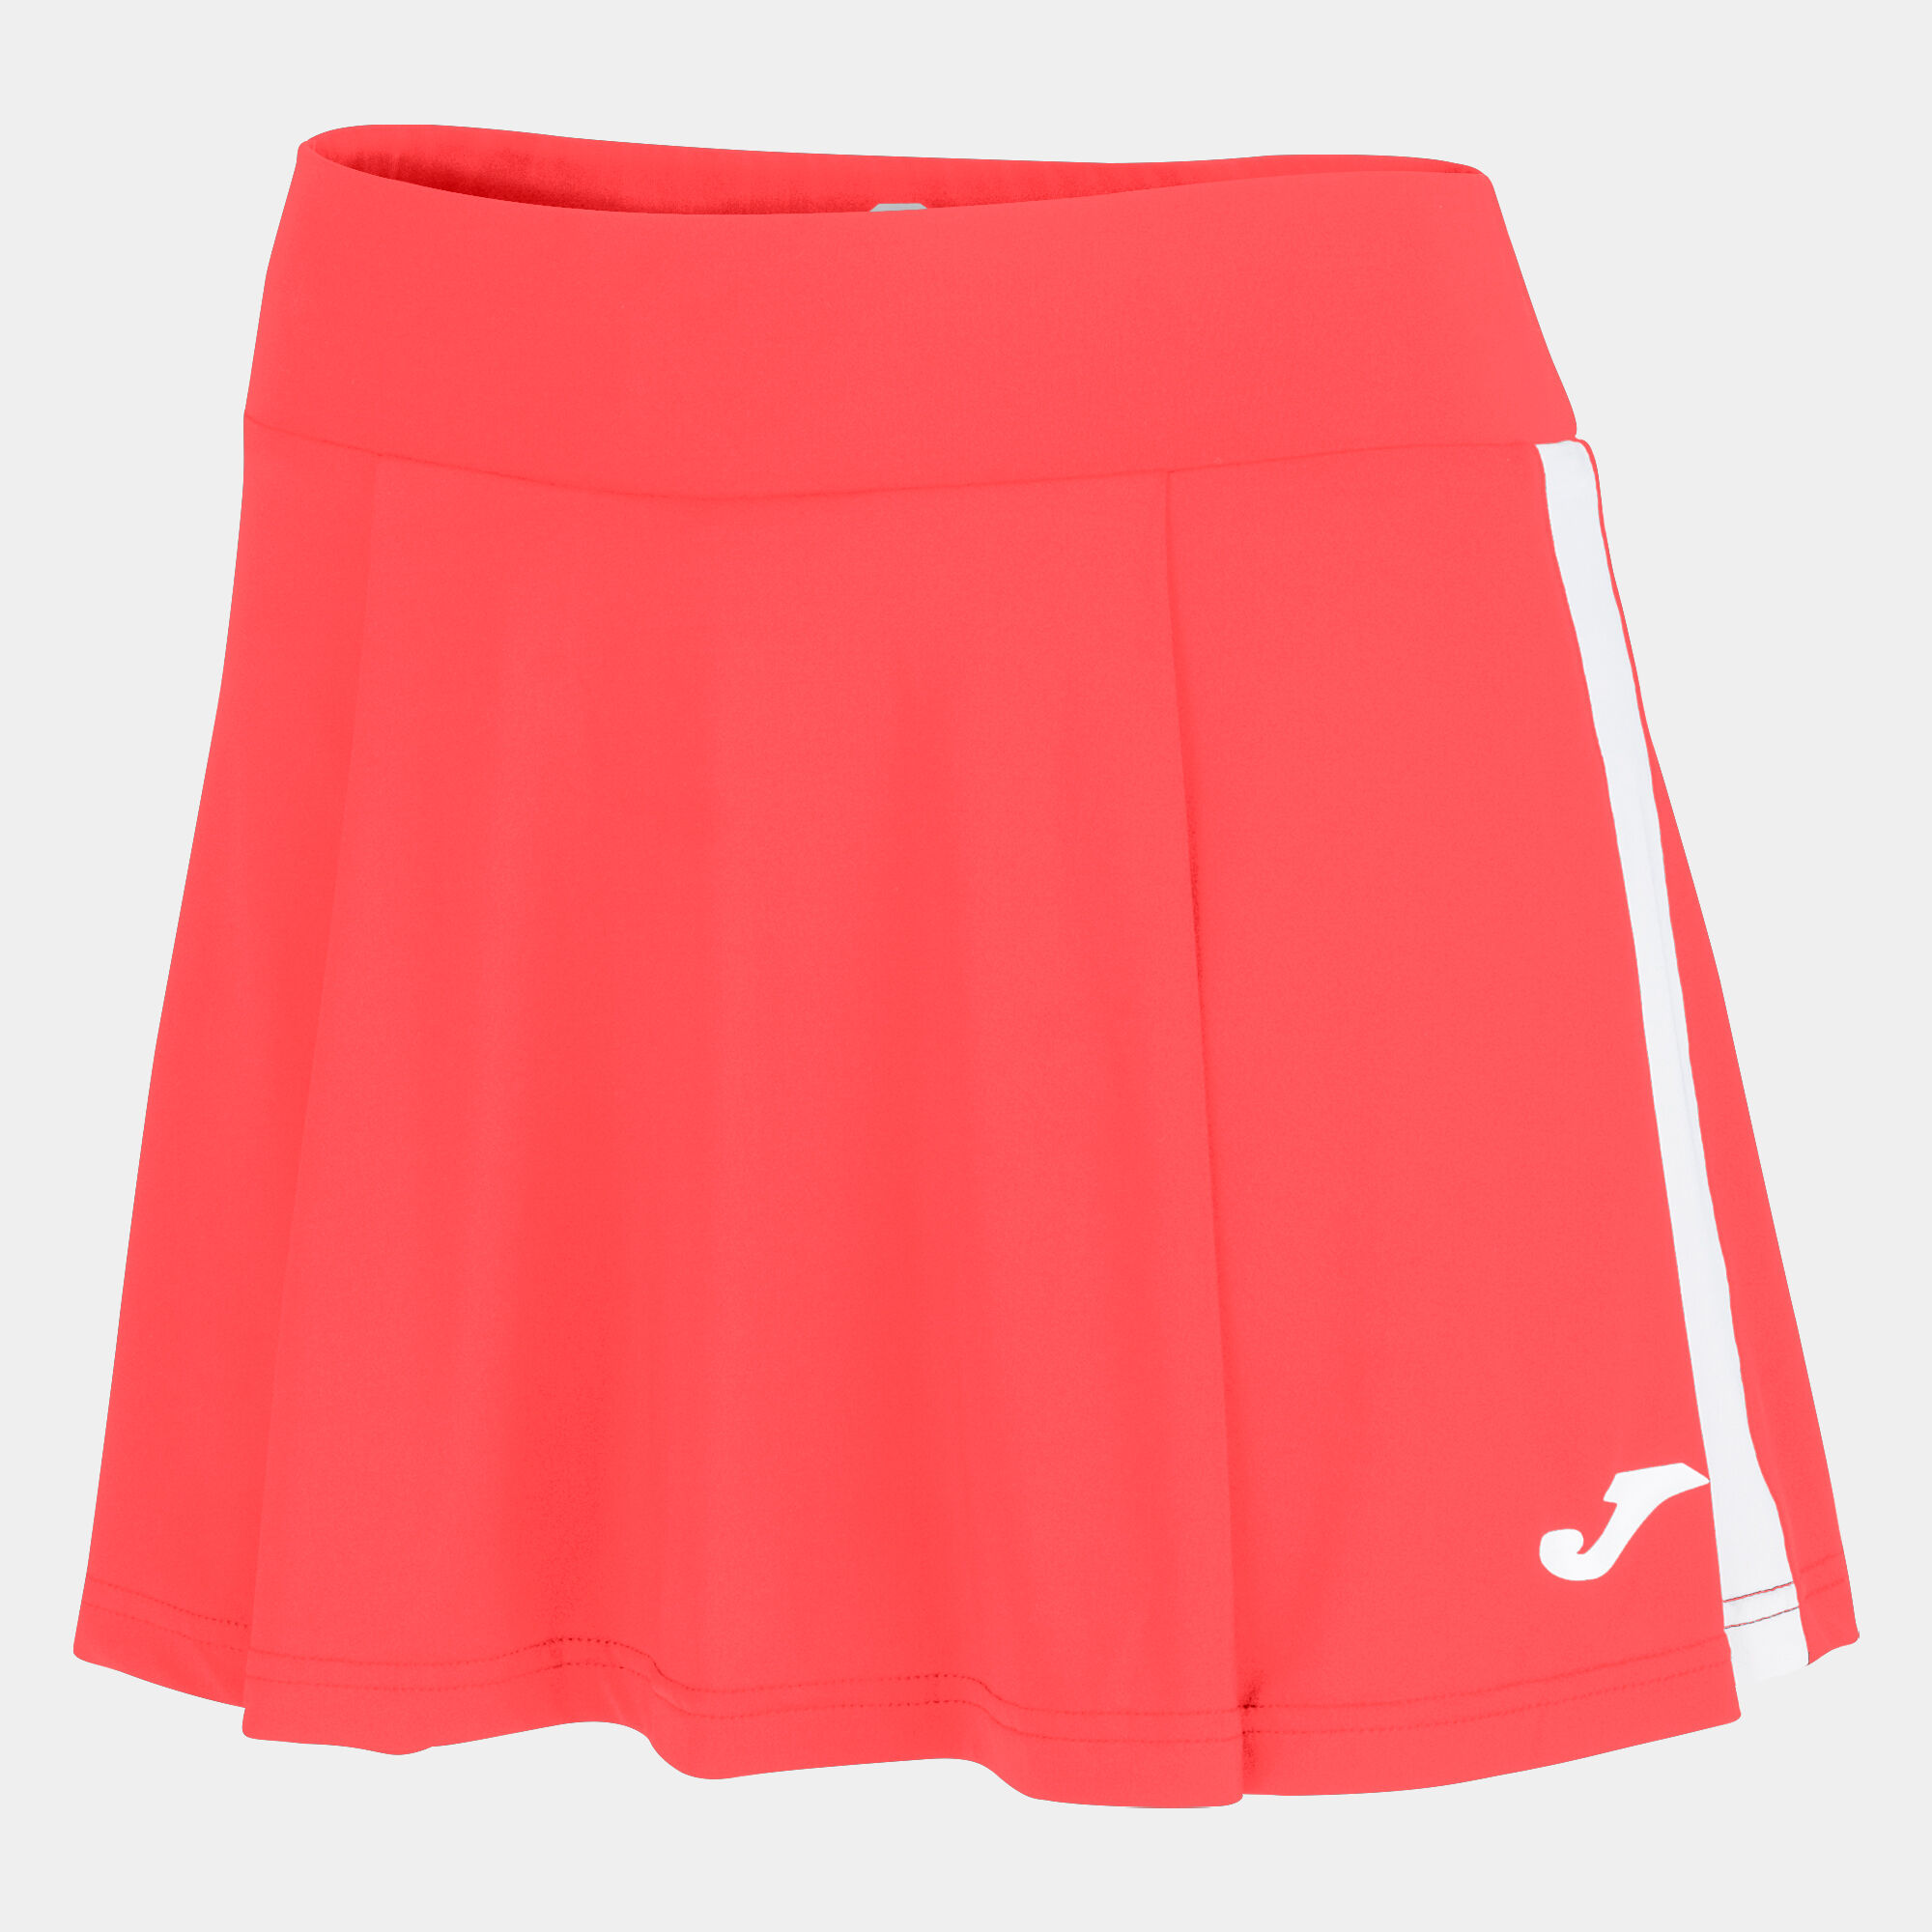 SKIRT WOMAN TORNEO FLUORESCENT CORAL WHITE